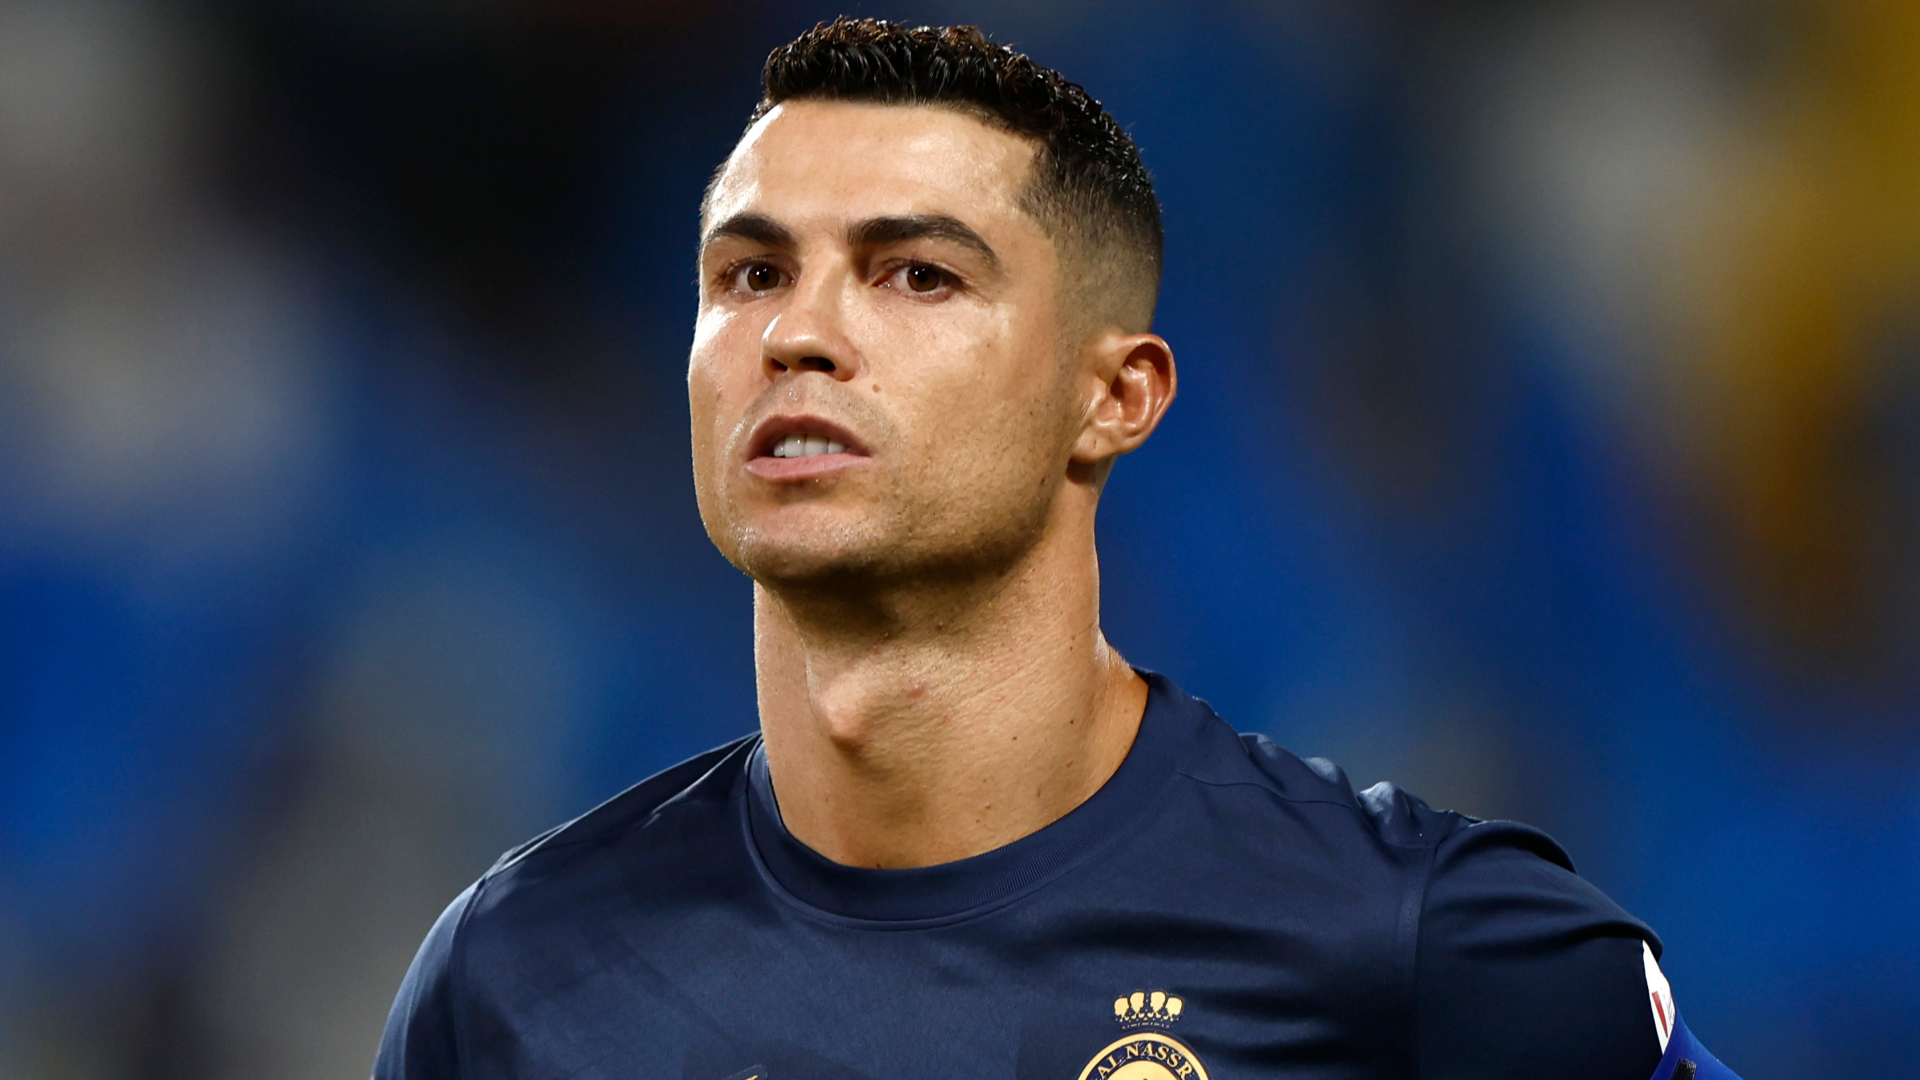 Cristiano Ronaldo New Look: As Juventus Star Sports New Hairdo, Take a Look  at His Three Memorable Hairstyles Over the Years! | ⚽ LatestLY